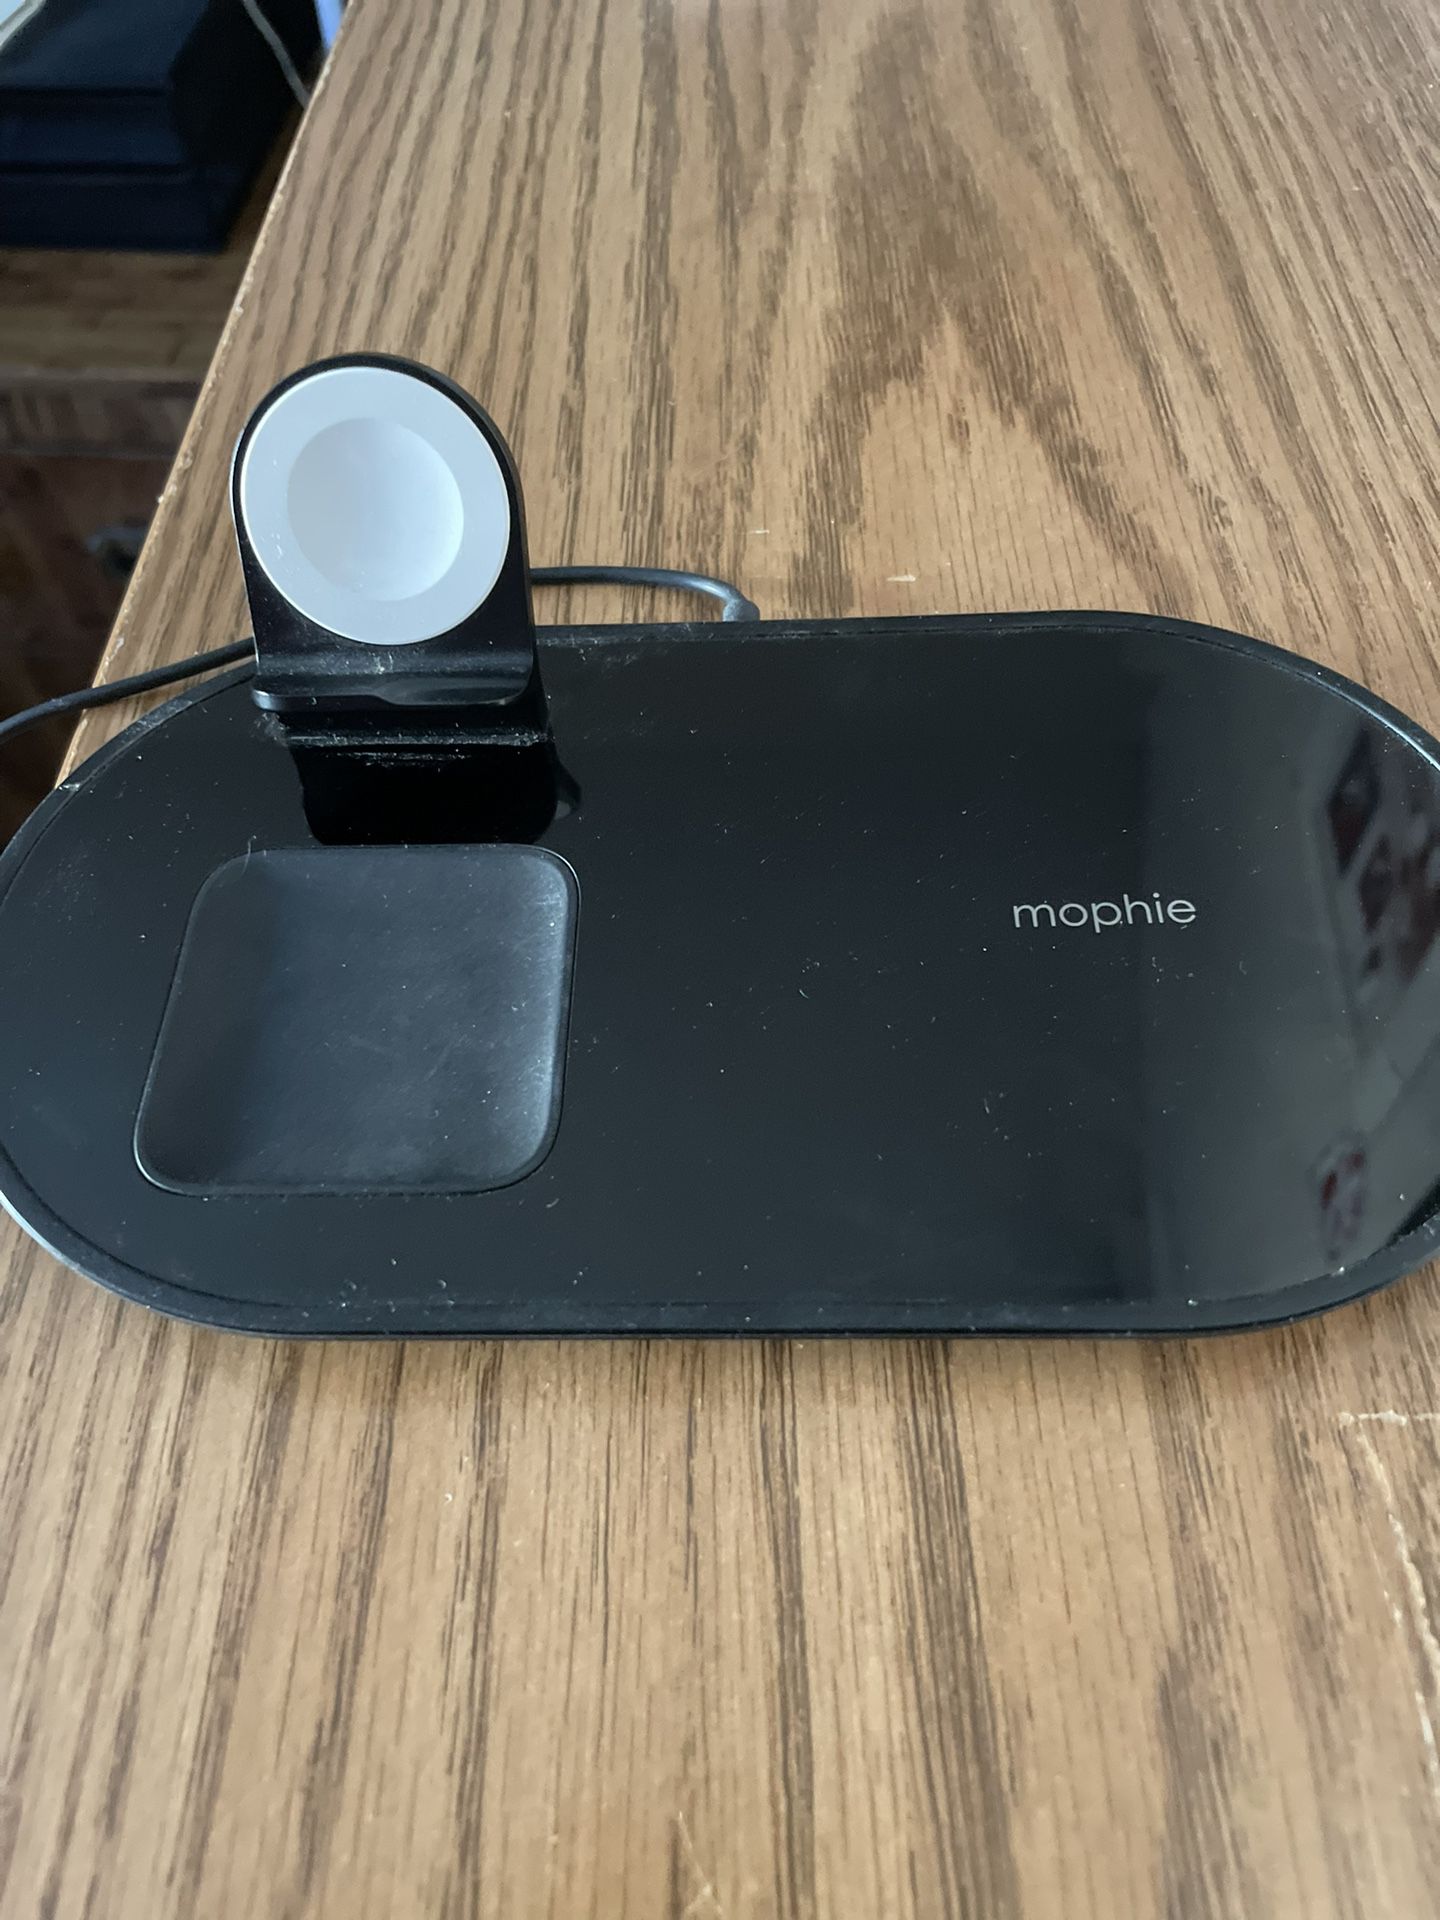 mophie 3 in 1 Wireless Charge Pad - 7.5W Charging Pad for iPhone, Airpods, and Apple Watch